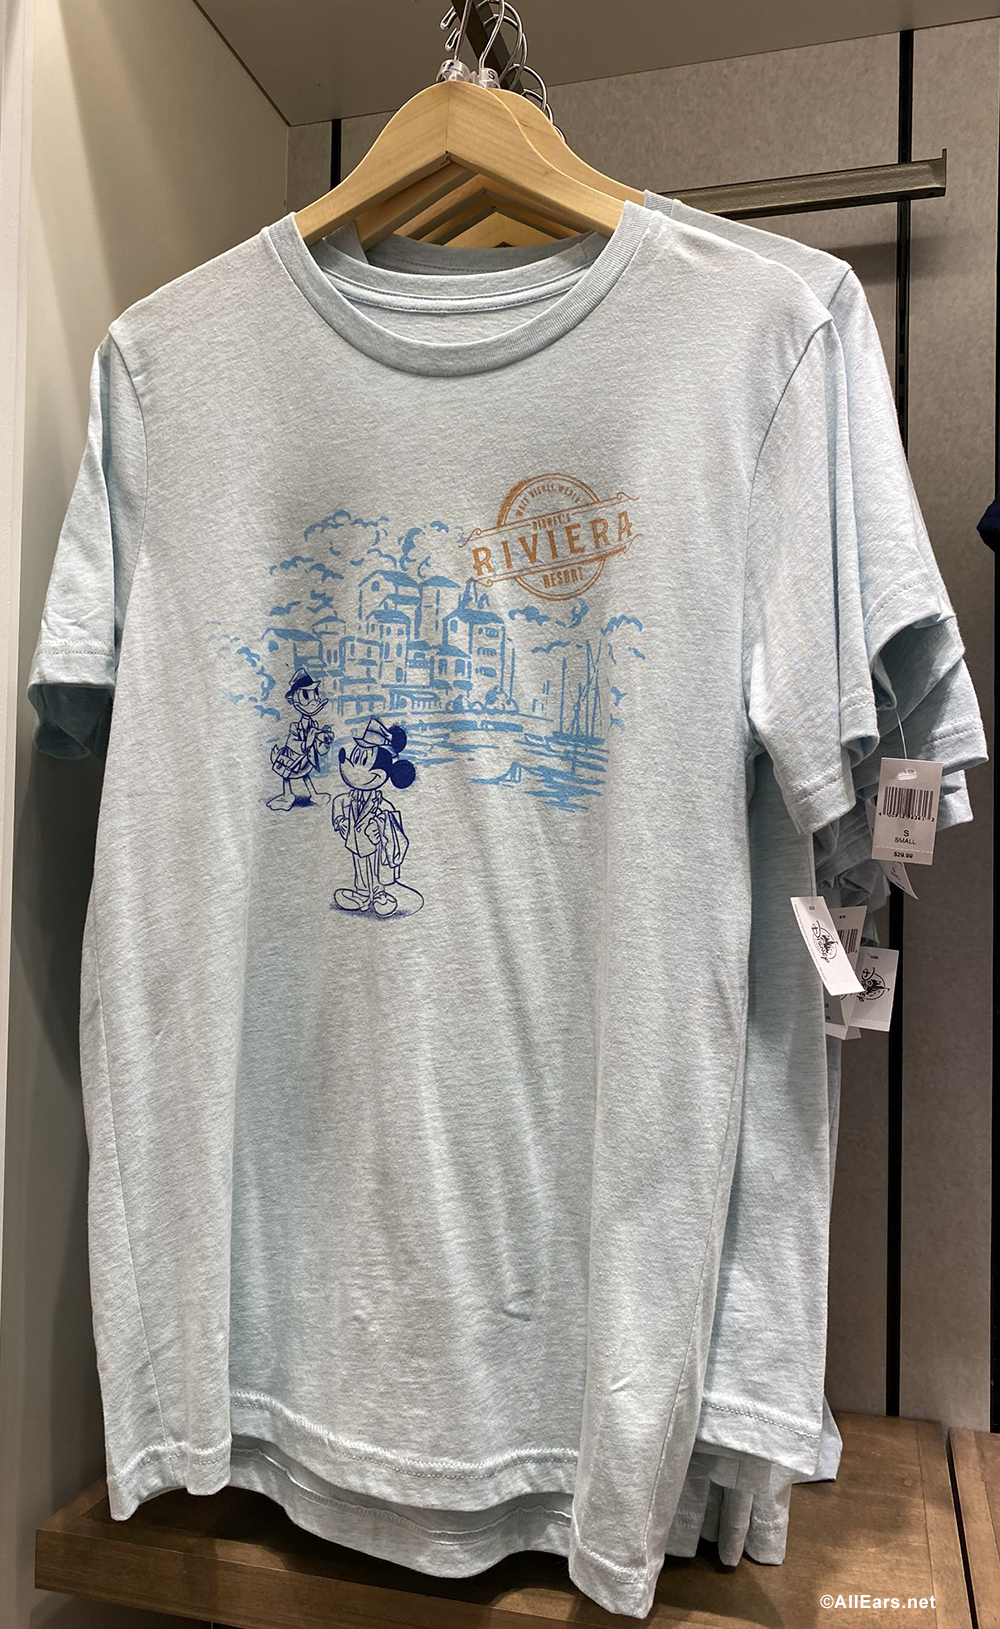 Check Out All The New Merch at Disney's Riviera Resort! - AllEars.Net